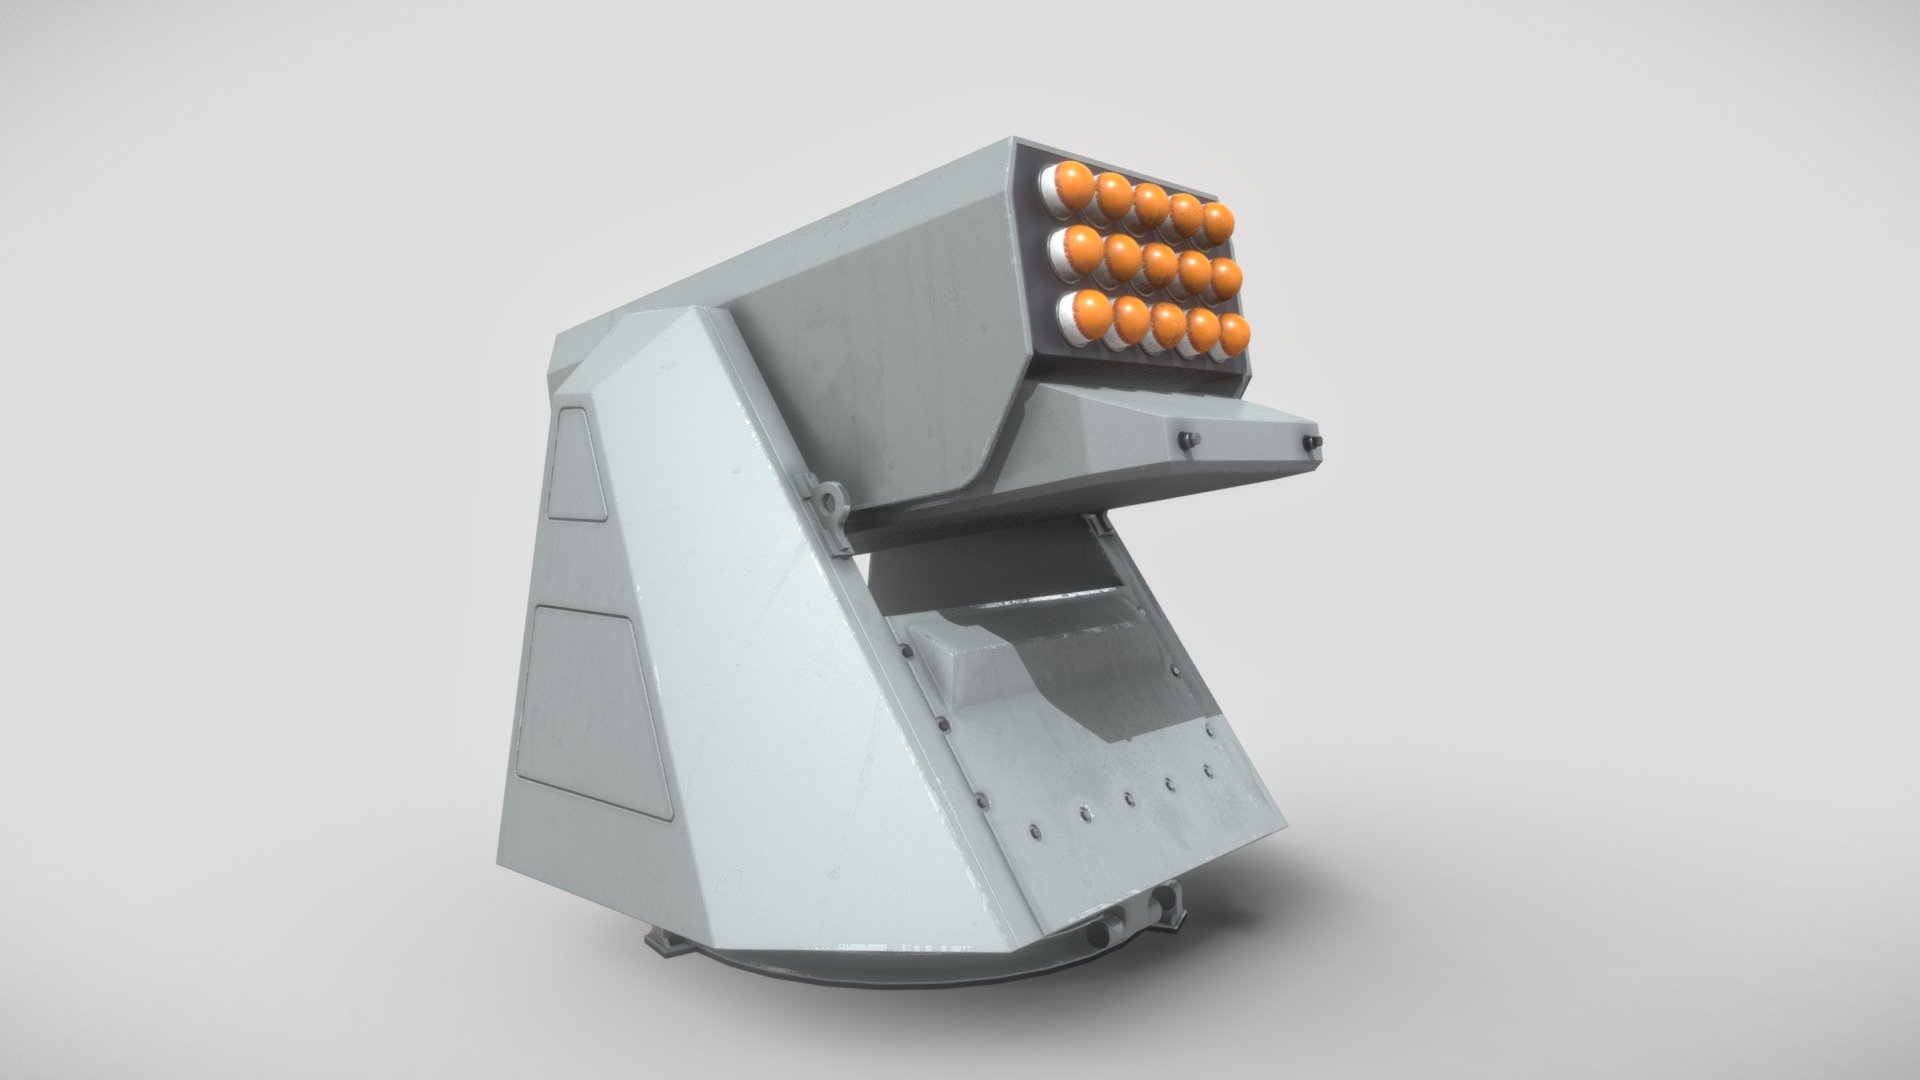 The ODLS is manufactured by Leonardo (Formerly Oto Melara). It's main use is to defend the ship from sensor guided missiles by launching decoys.

This 3D model was created using 3ds Max, with textures designed in Substance Painter. The model has been meticulously unwrapped and divided into separate parts, enabling the base and turret to rotate seamlessly. If necessary, I am also capable of exporting the textures in various formats suitable for Unity, Unreal Engine, or V-Ray integration 3d model